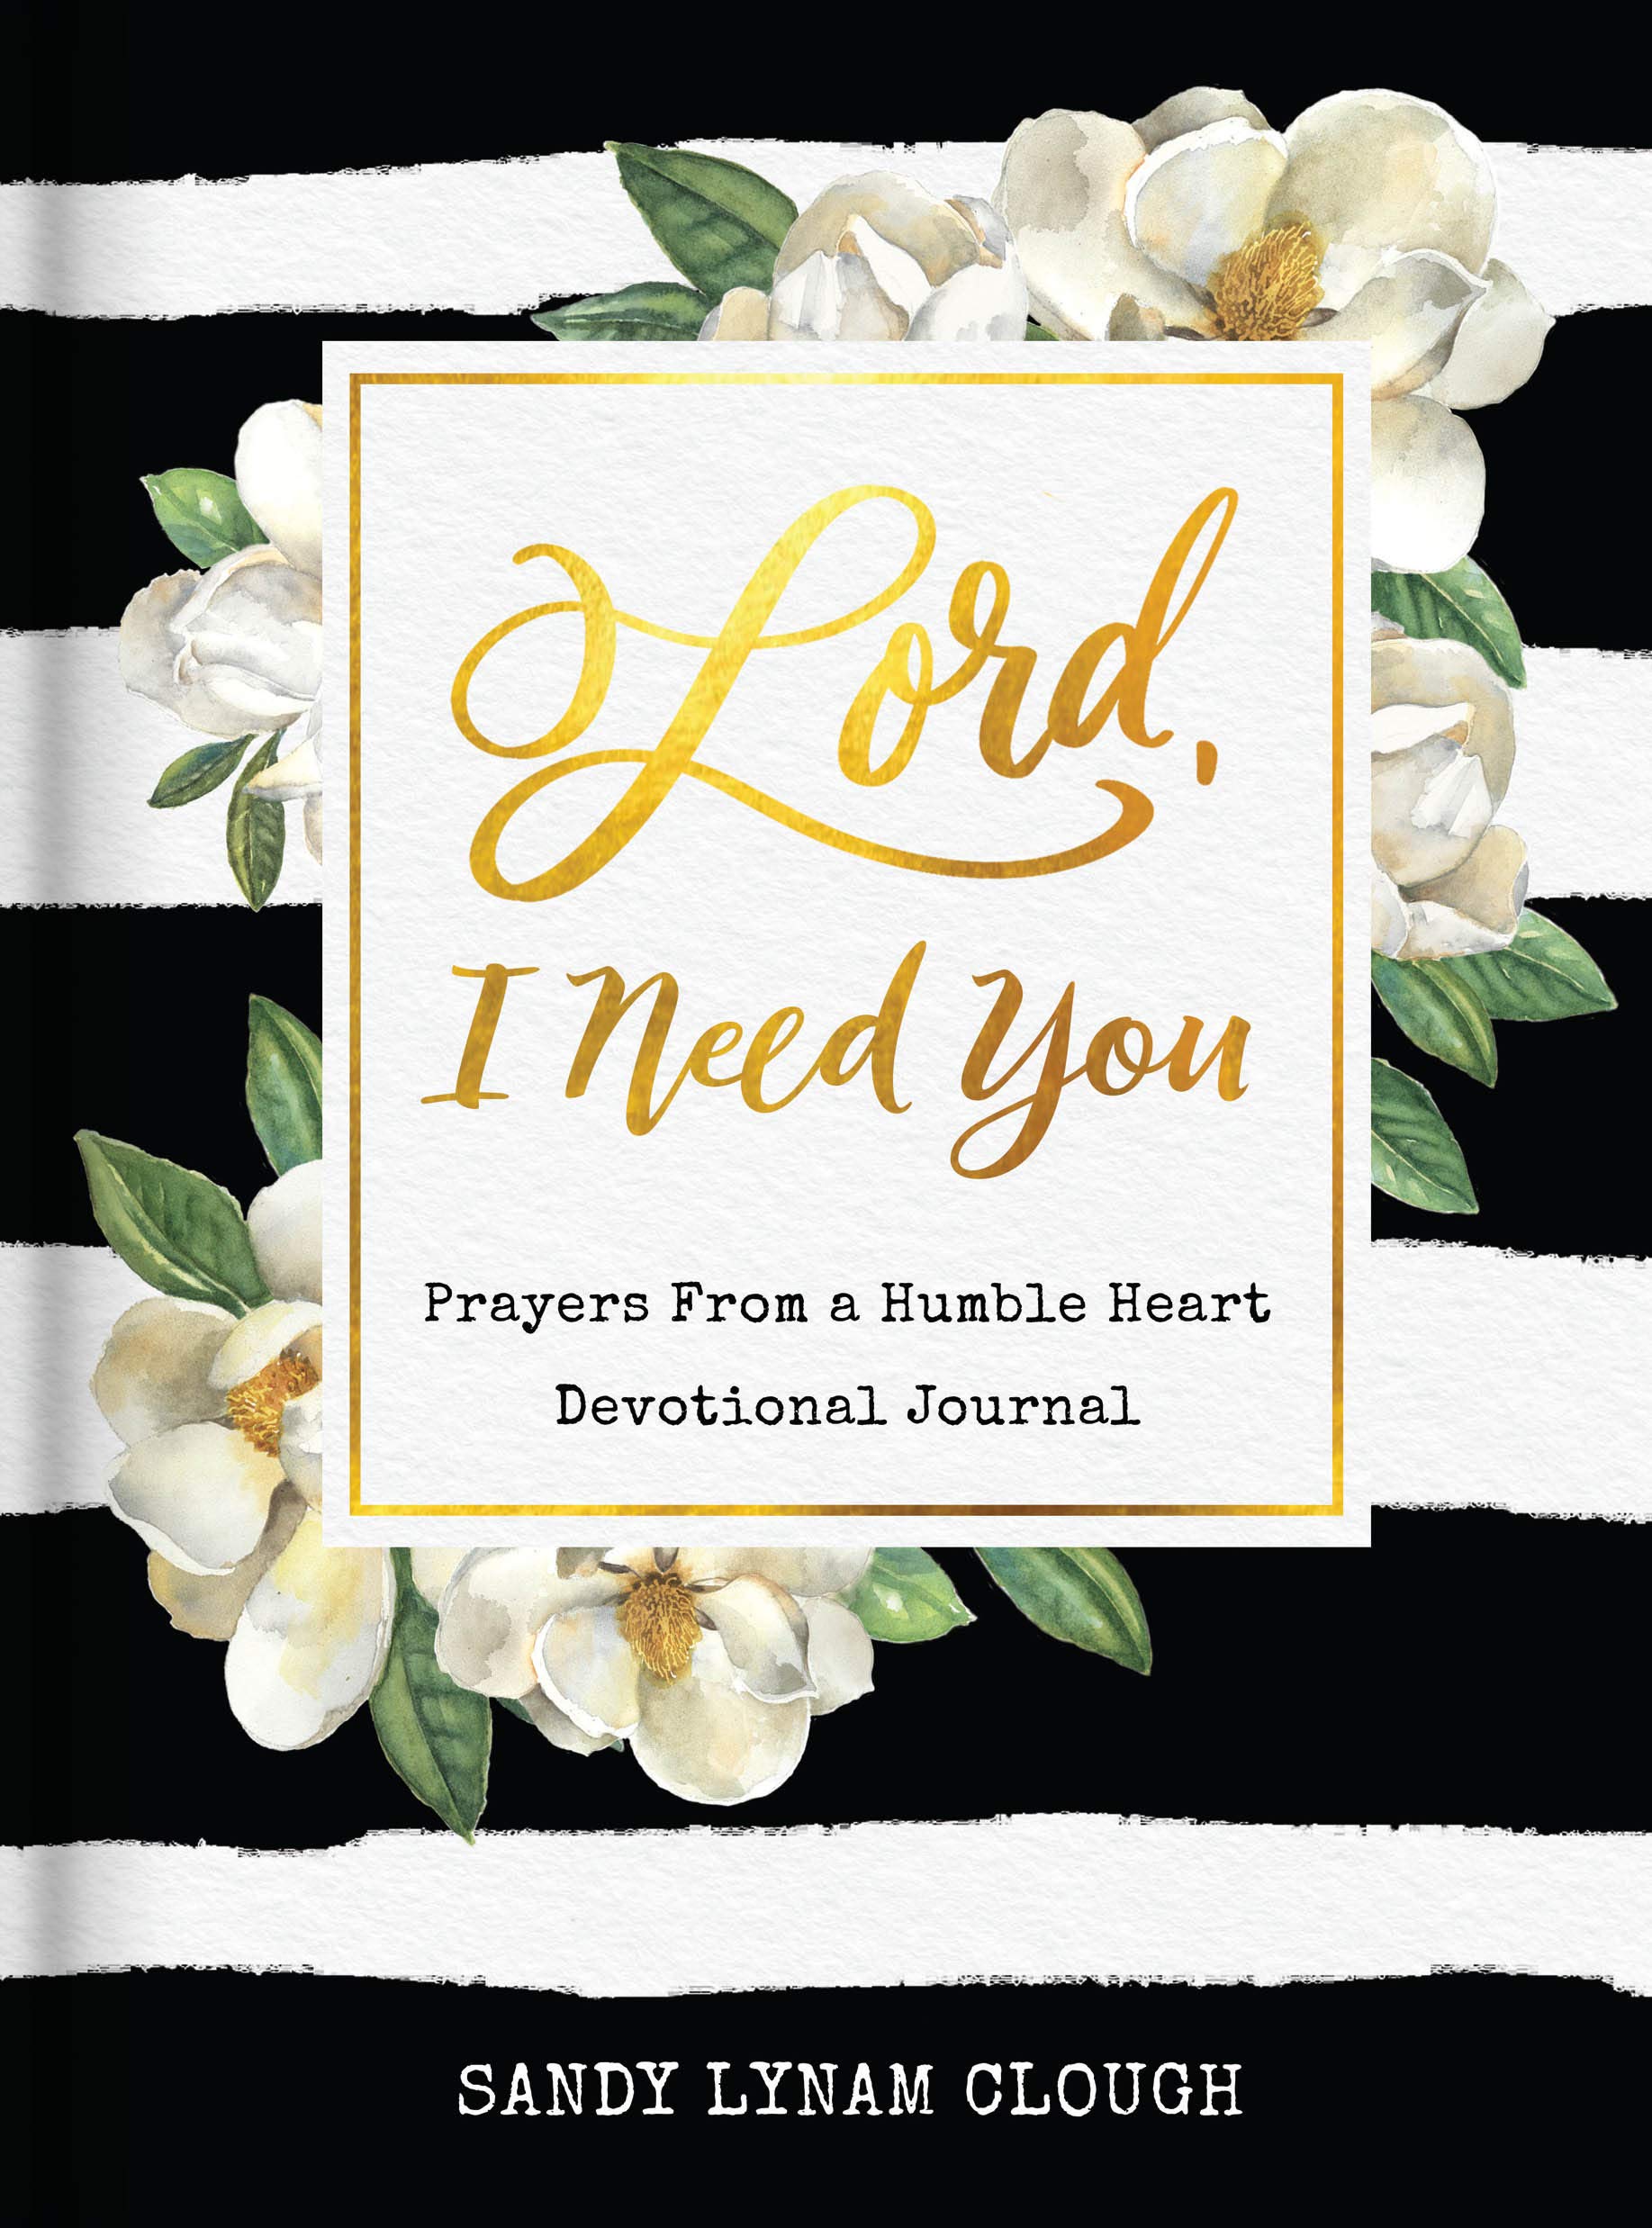 ROCKONLINE | New Creation Church | NCC | Joseph Prince | ROCK Bookshop | ROCK Bookstore | Star Vista | Journal | Devotional | God's Word | Christian Living | Bible | Lord, I Need You: Prayers from a Humble Heart (Hardcover) | Free delivery for Singapore Orders above $50.